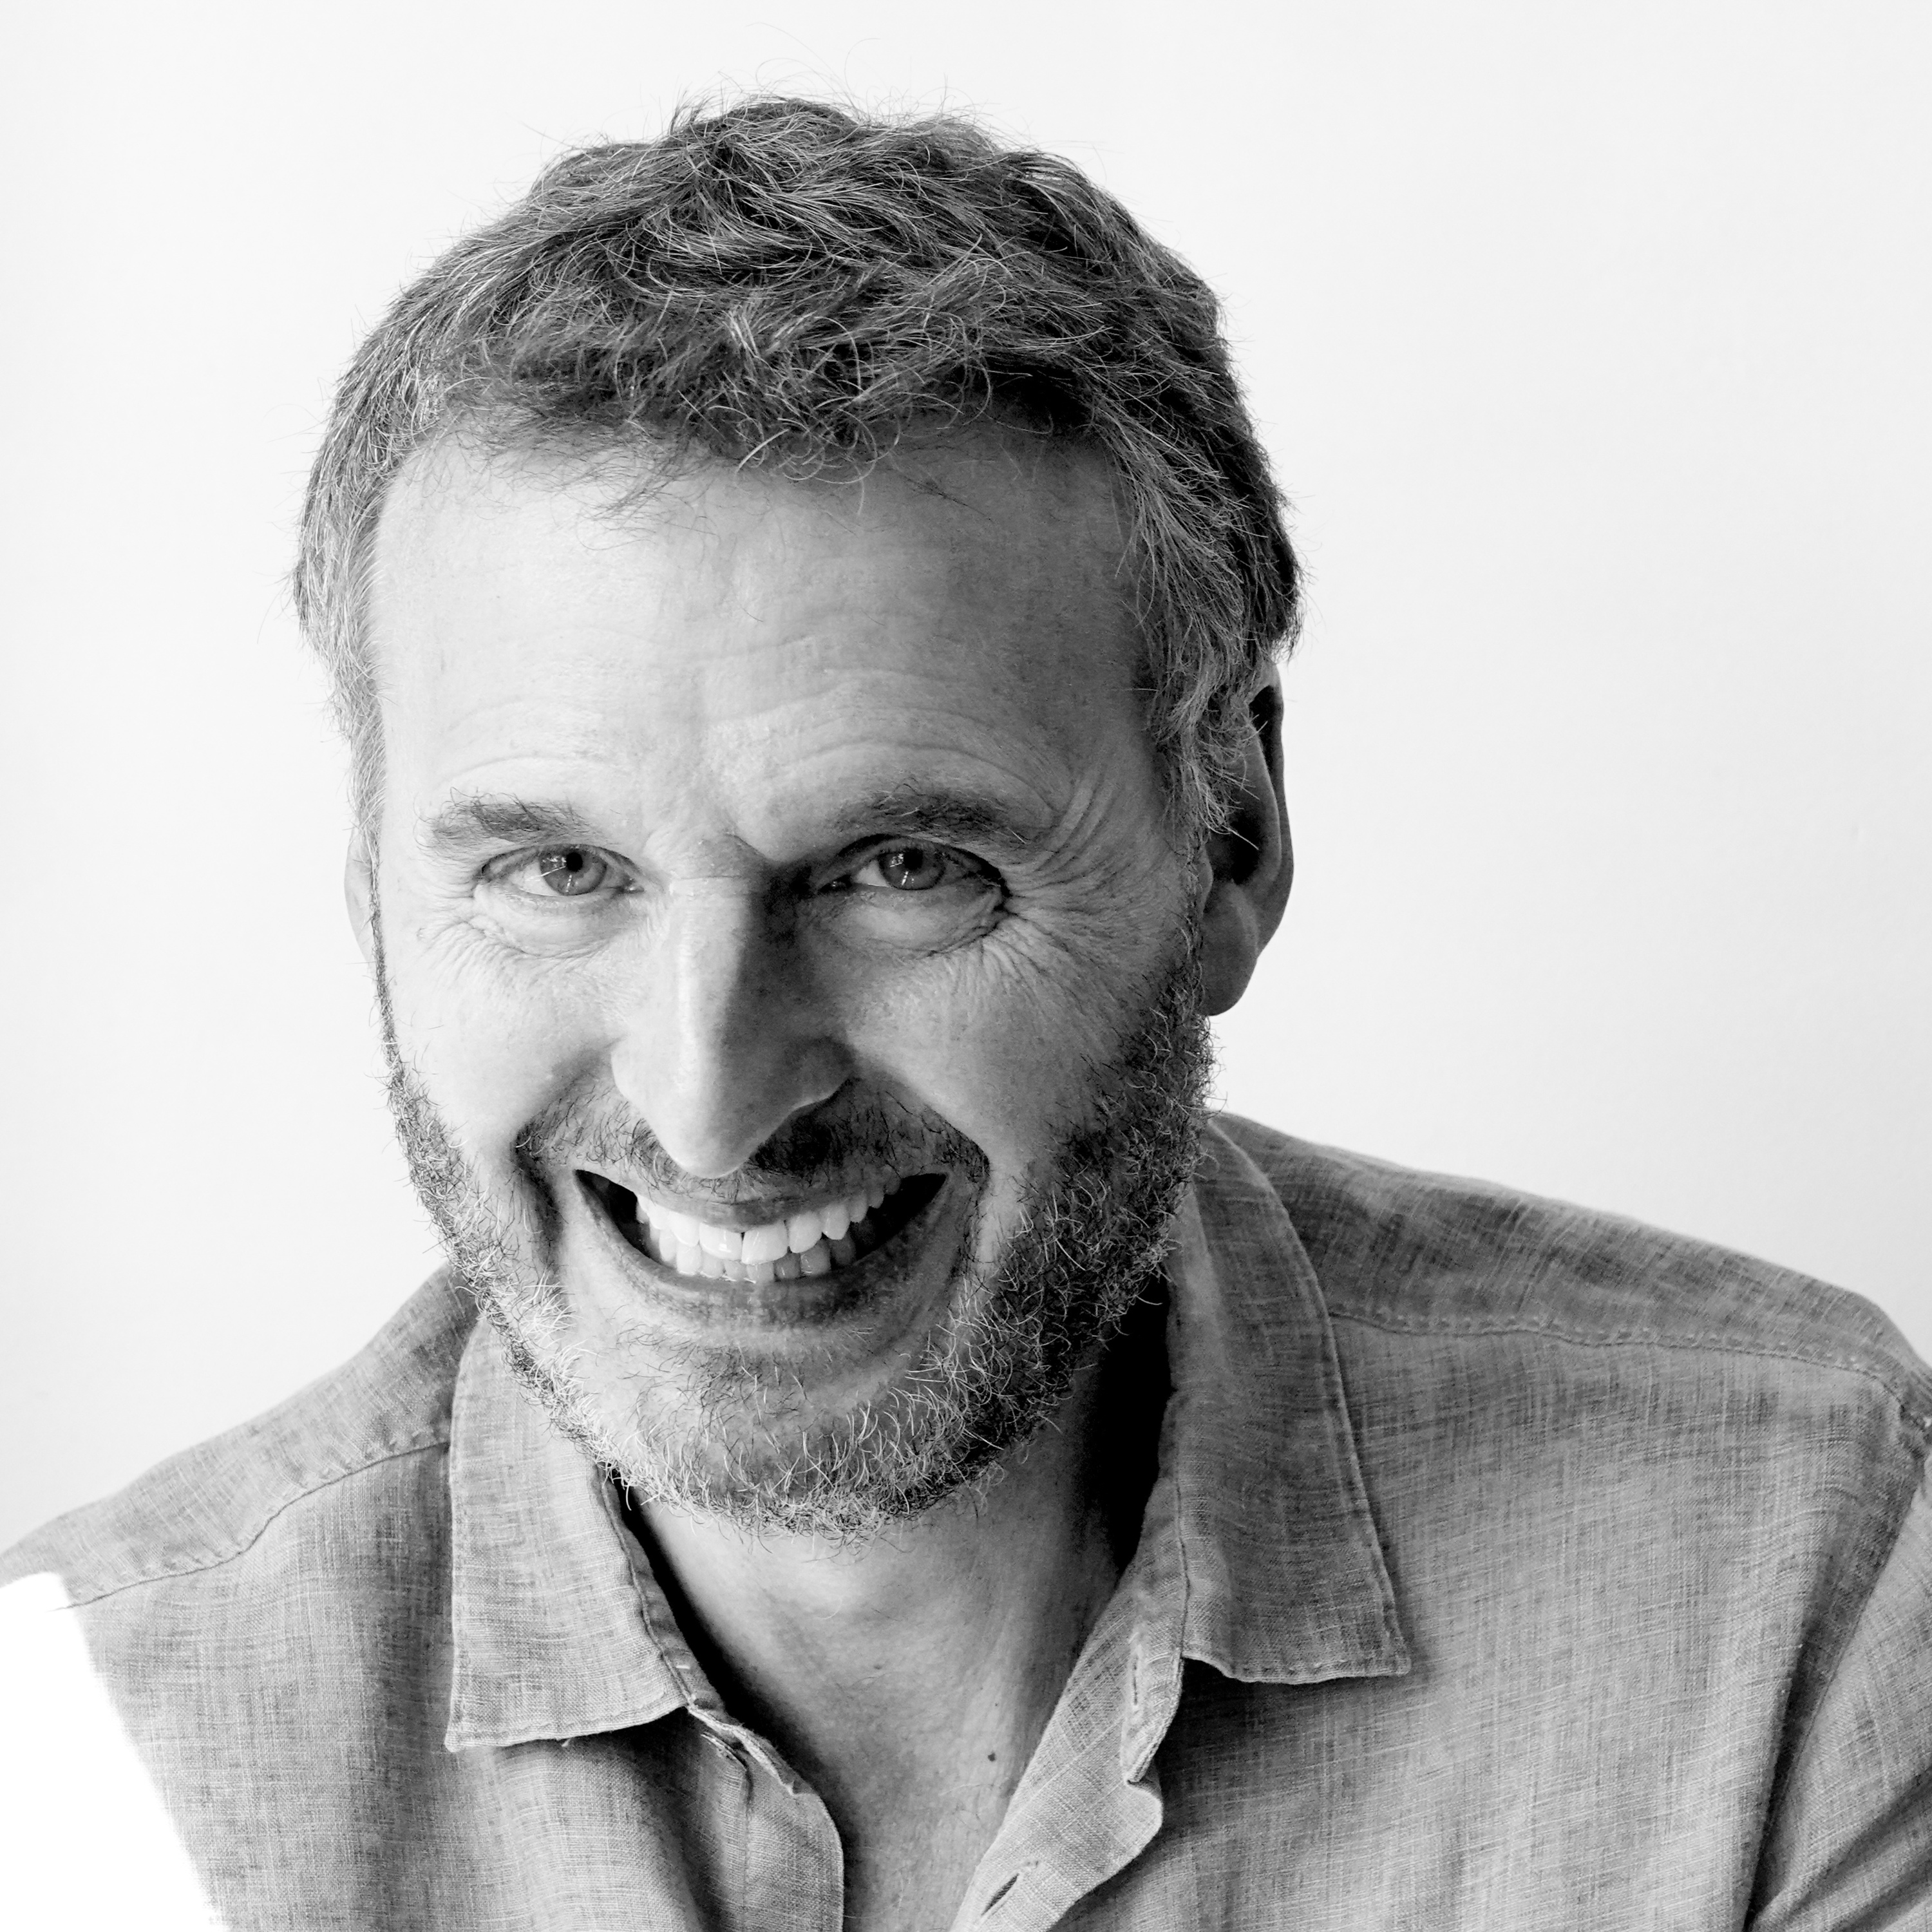 Tech tuneup with Netflix's Phil Rosenthal